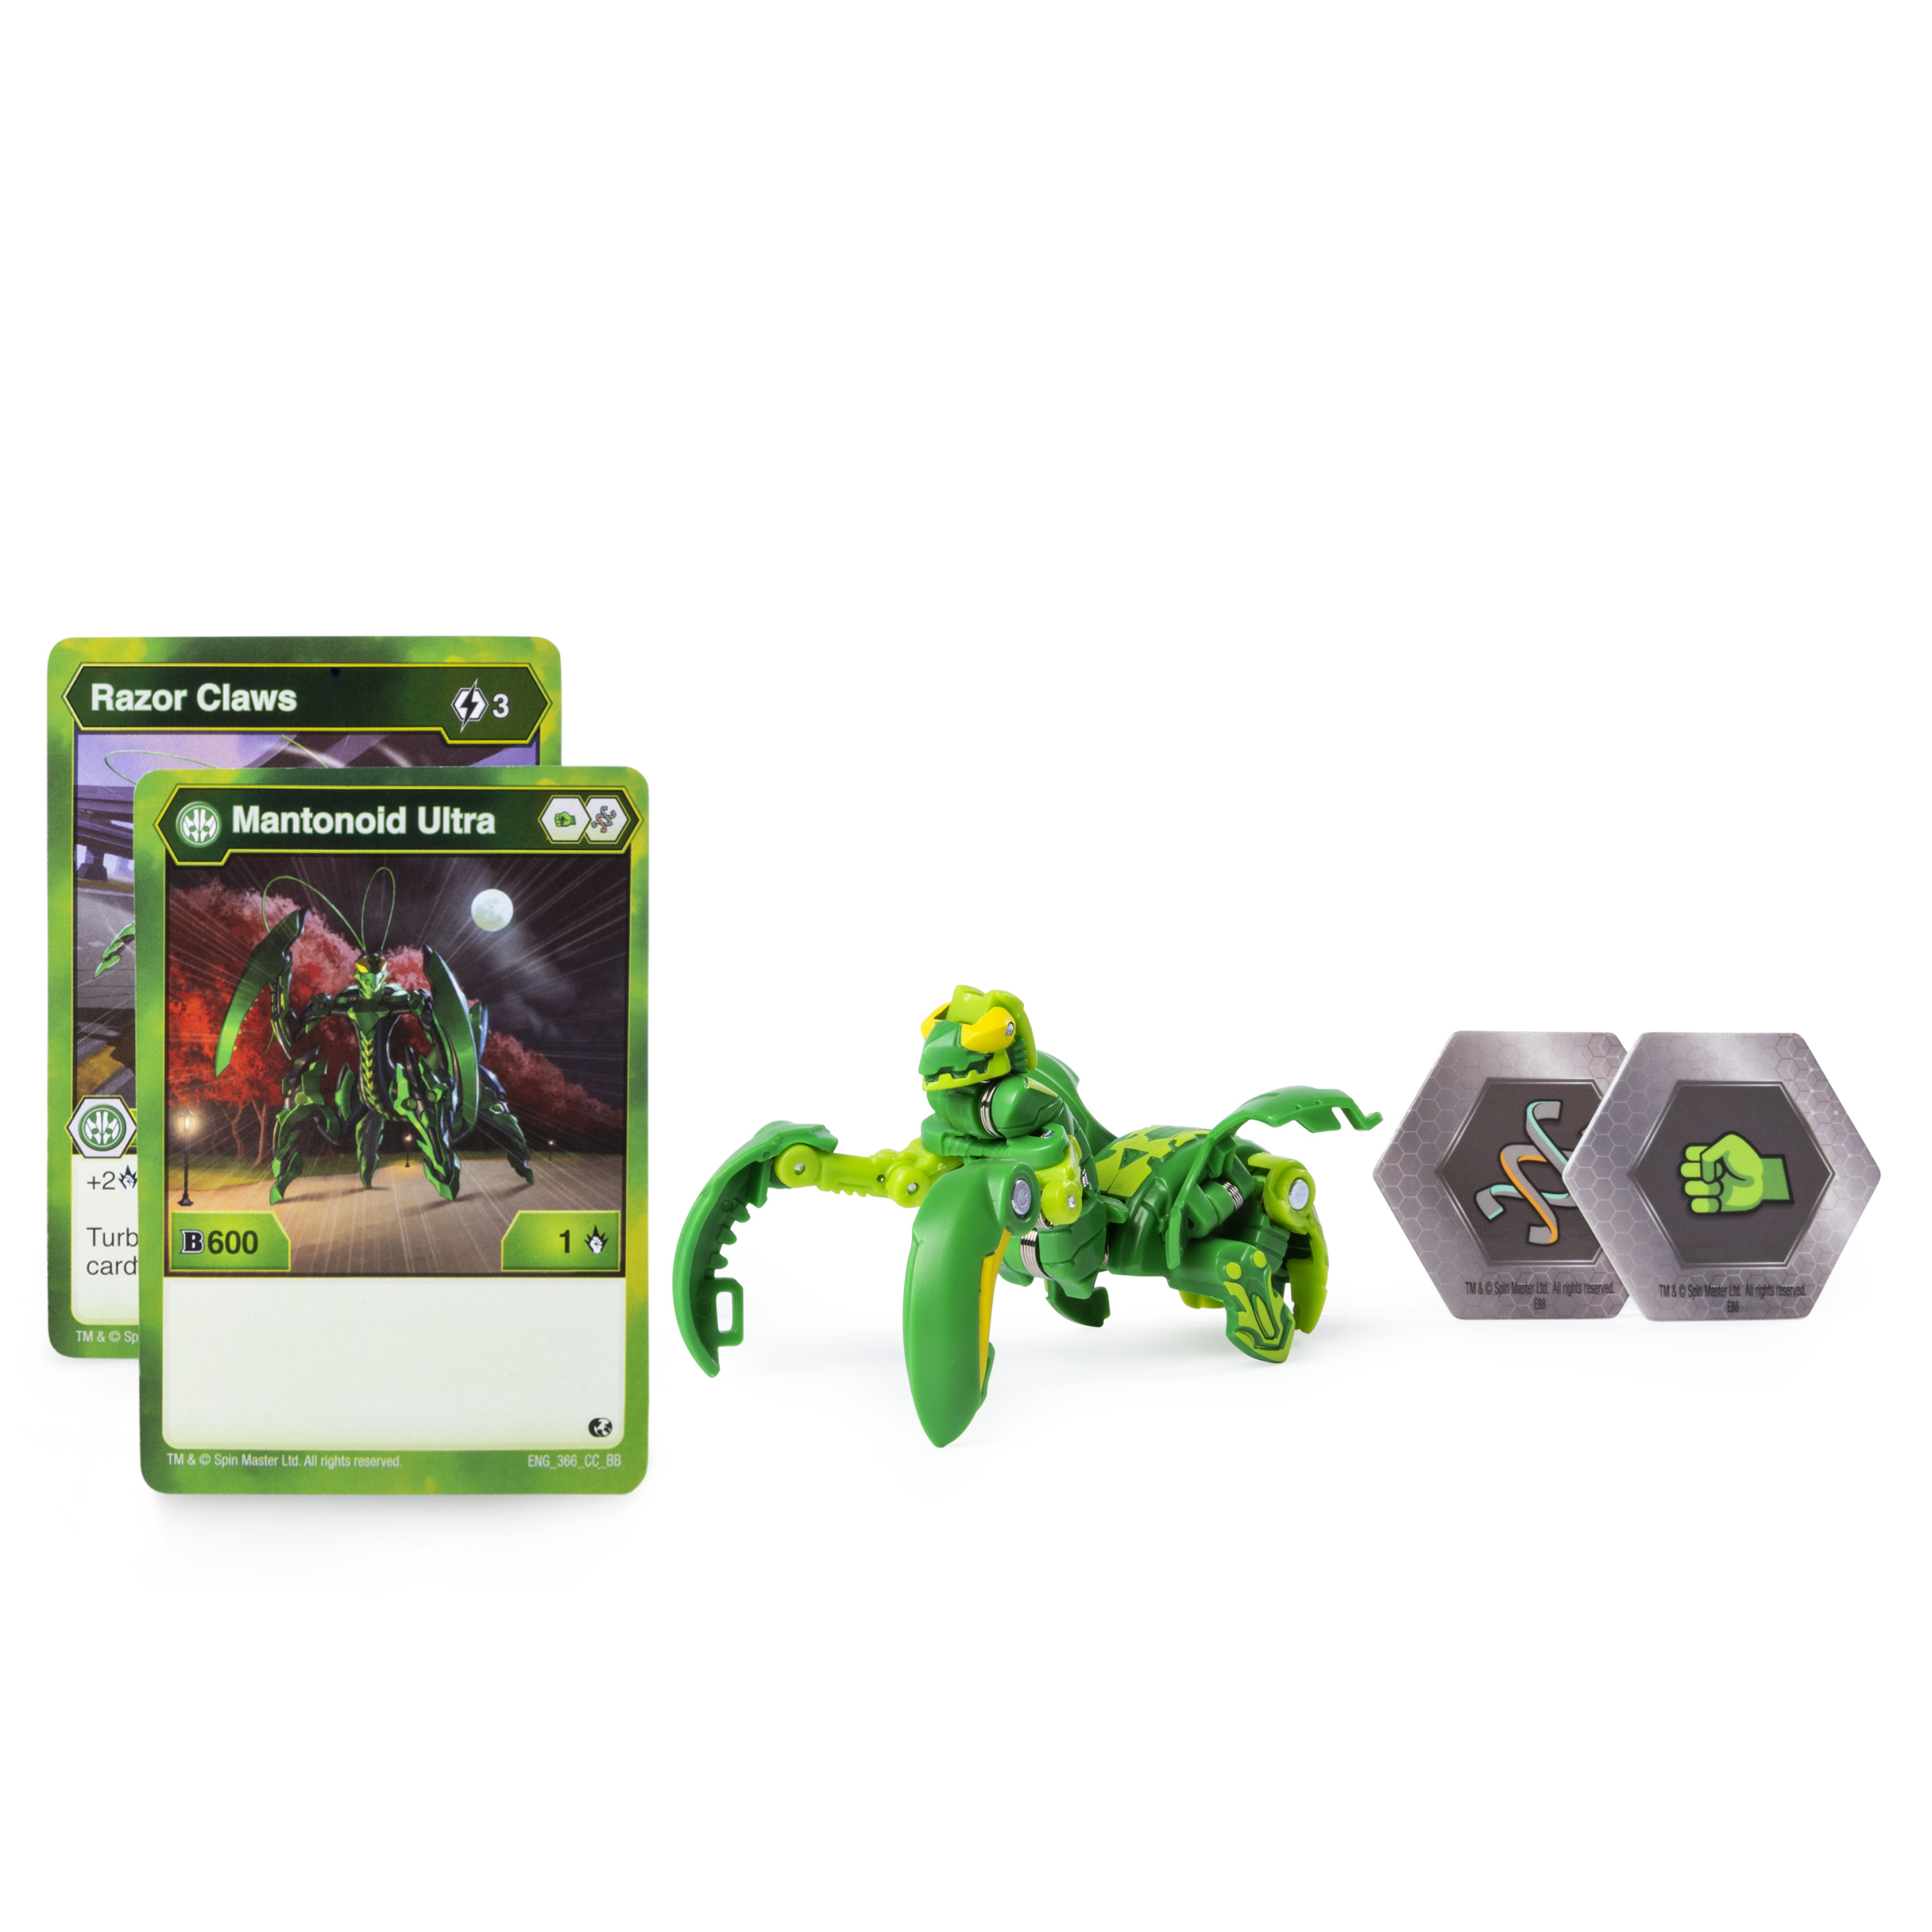 Bakugan Ultra, Mantonoid, 3-inch Collectible Action Figure and Trading Card, for Ages 6 and up - image 2 of 5